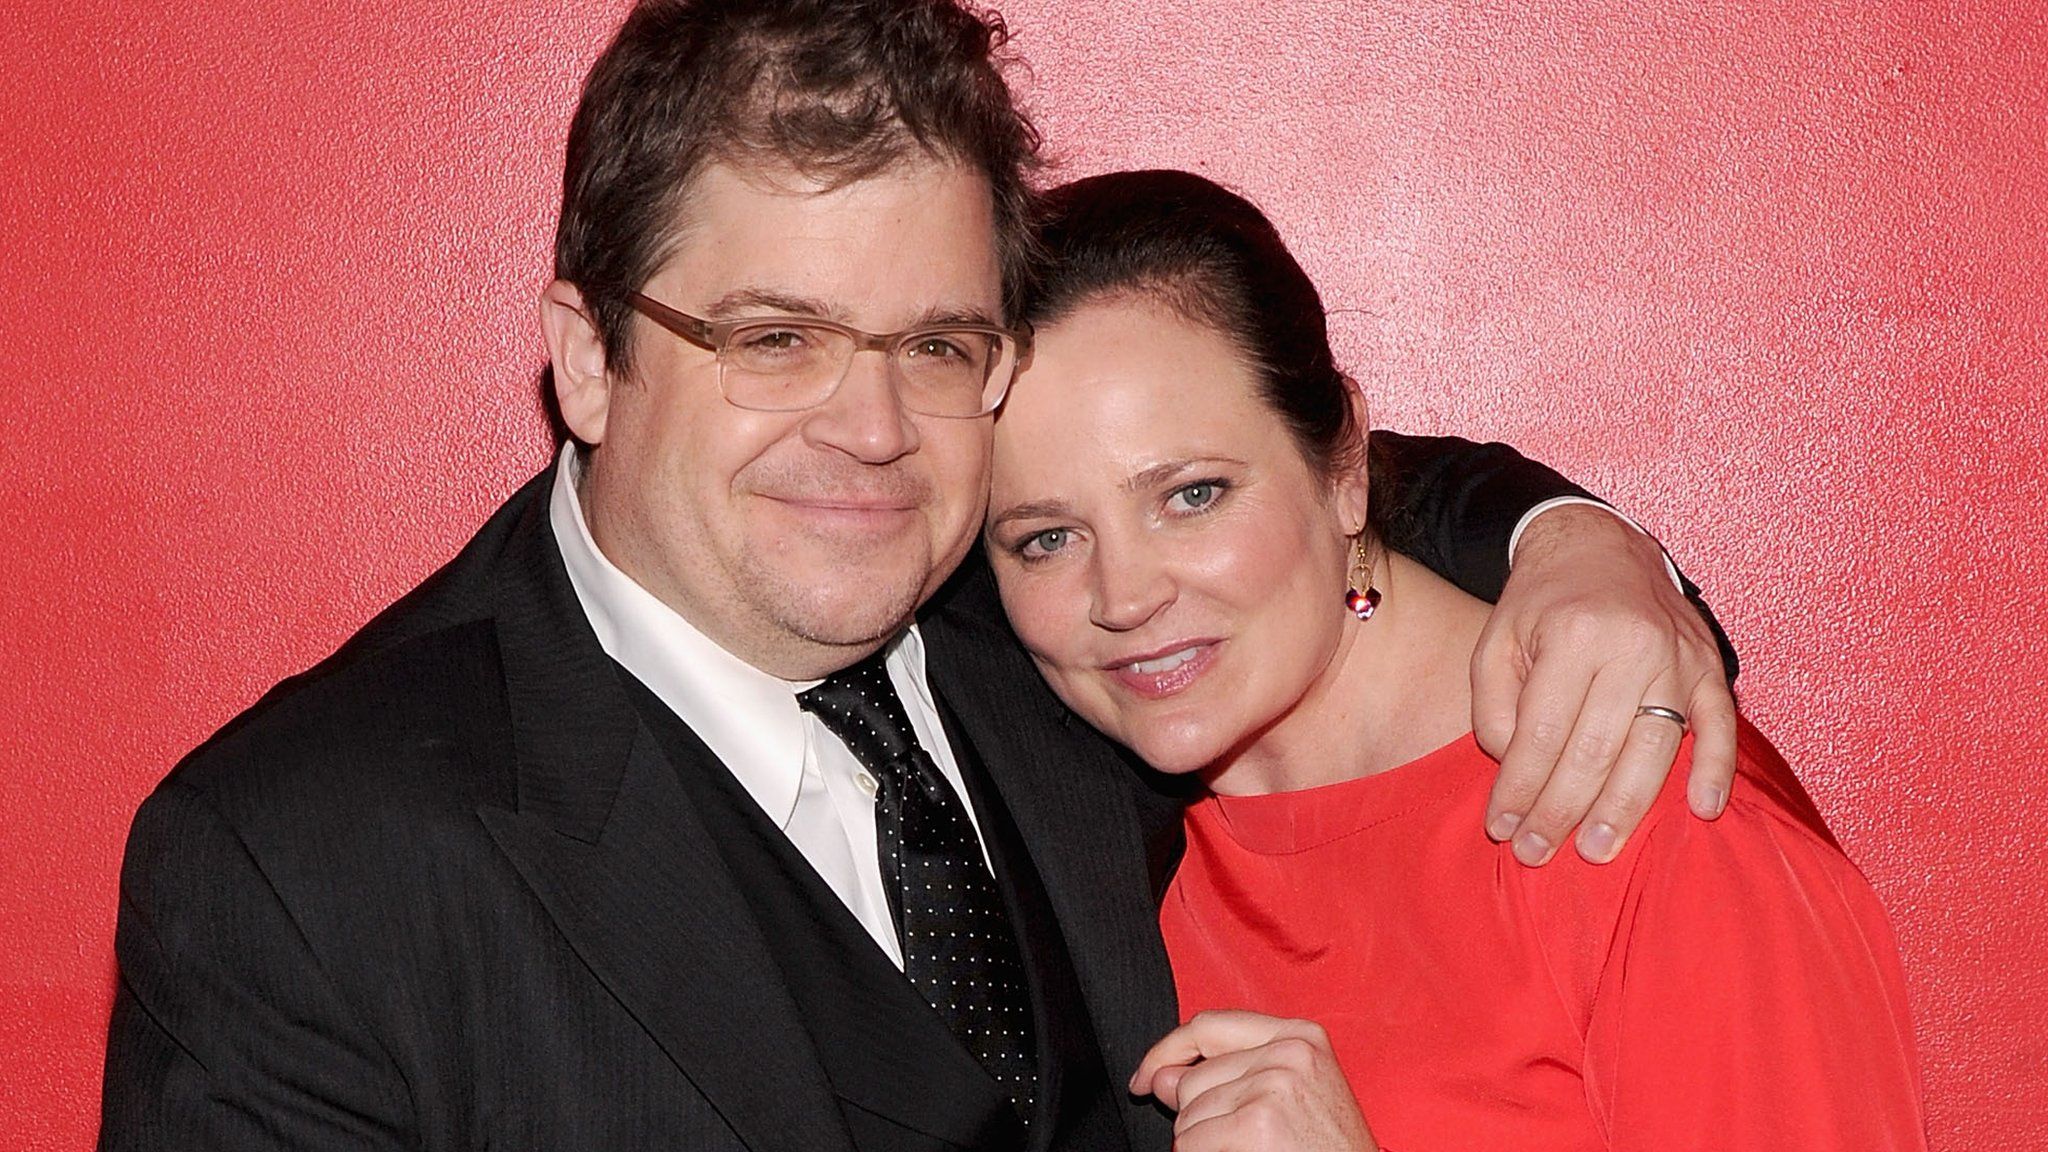 Comedian Patton Oswalt with his late wife Michelle McNamara in 2011